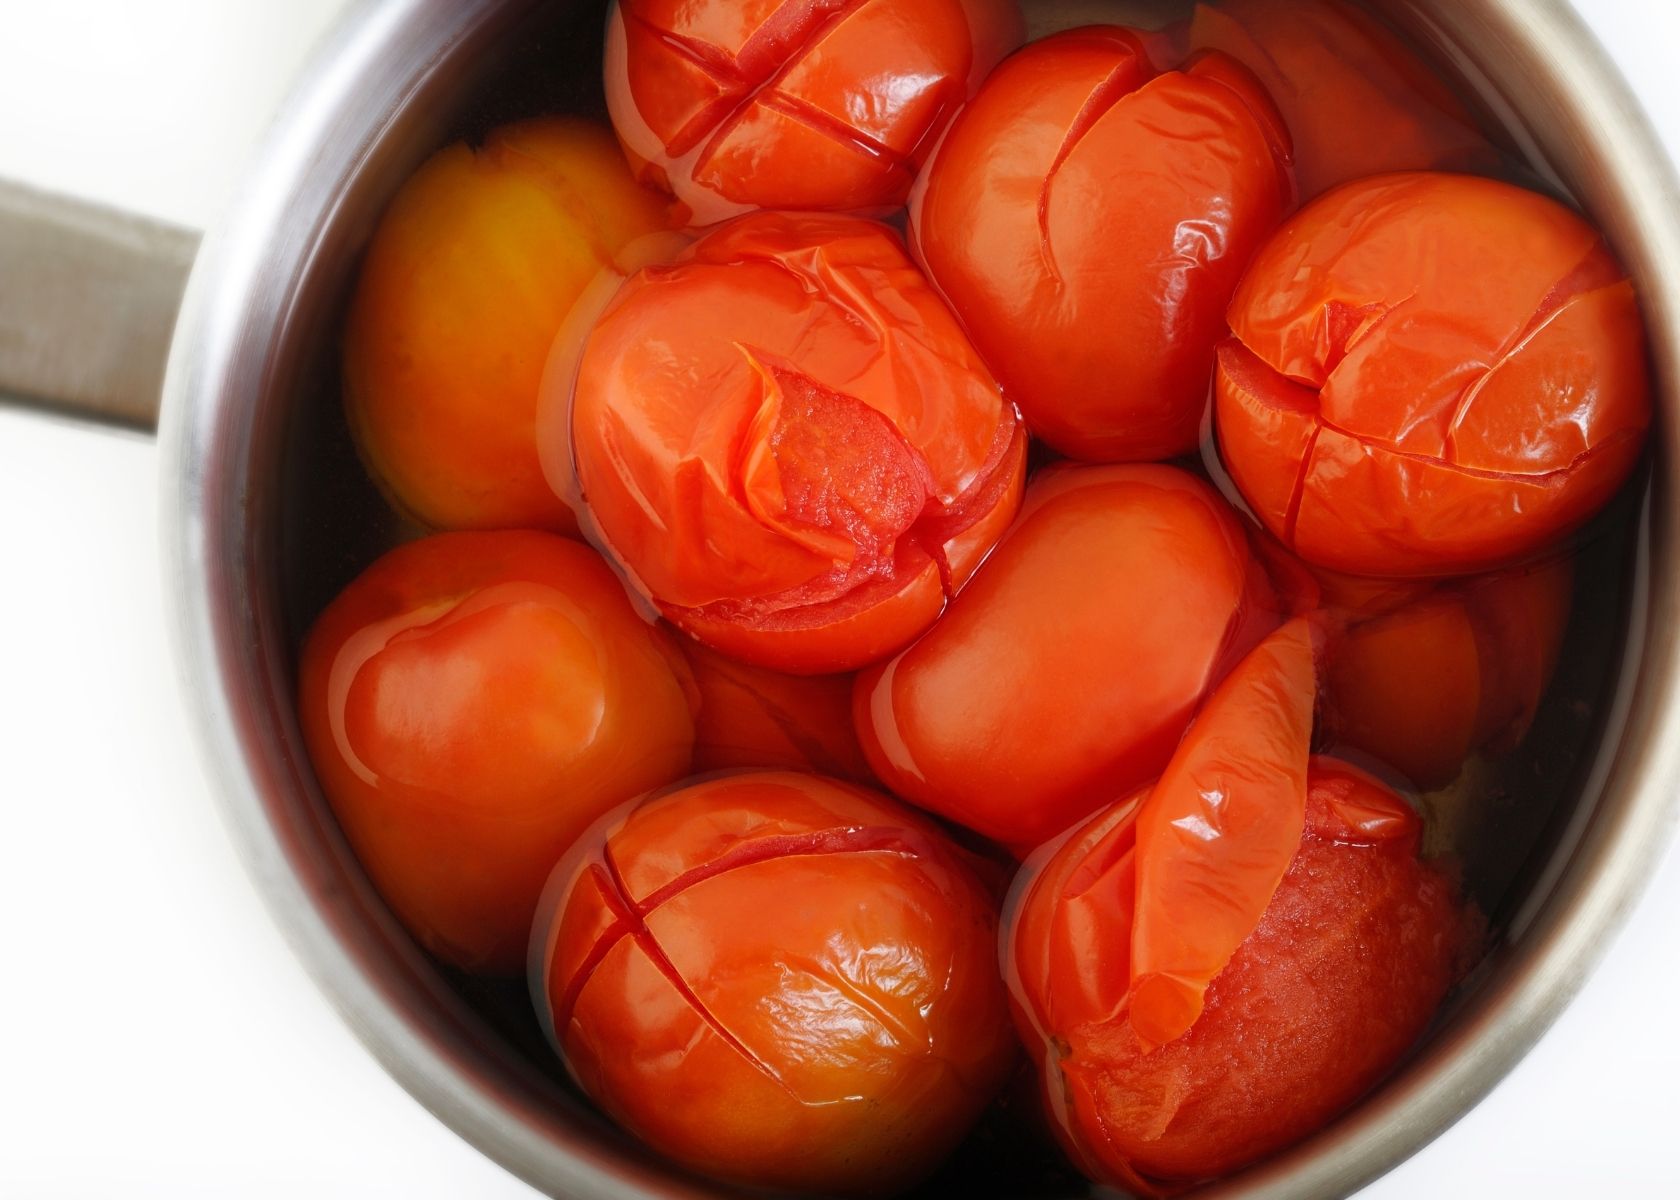 Scored and cooked whole tomatoes in large metal cooking pot filled with water.